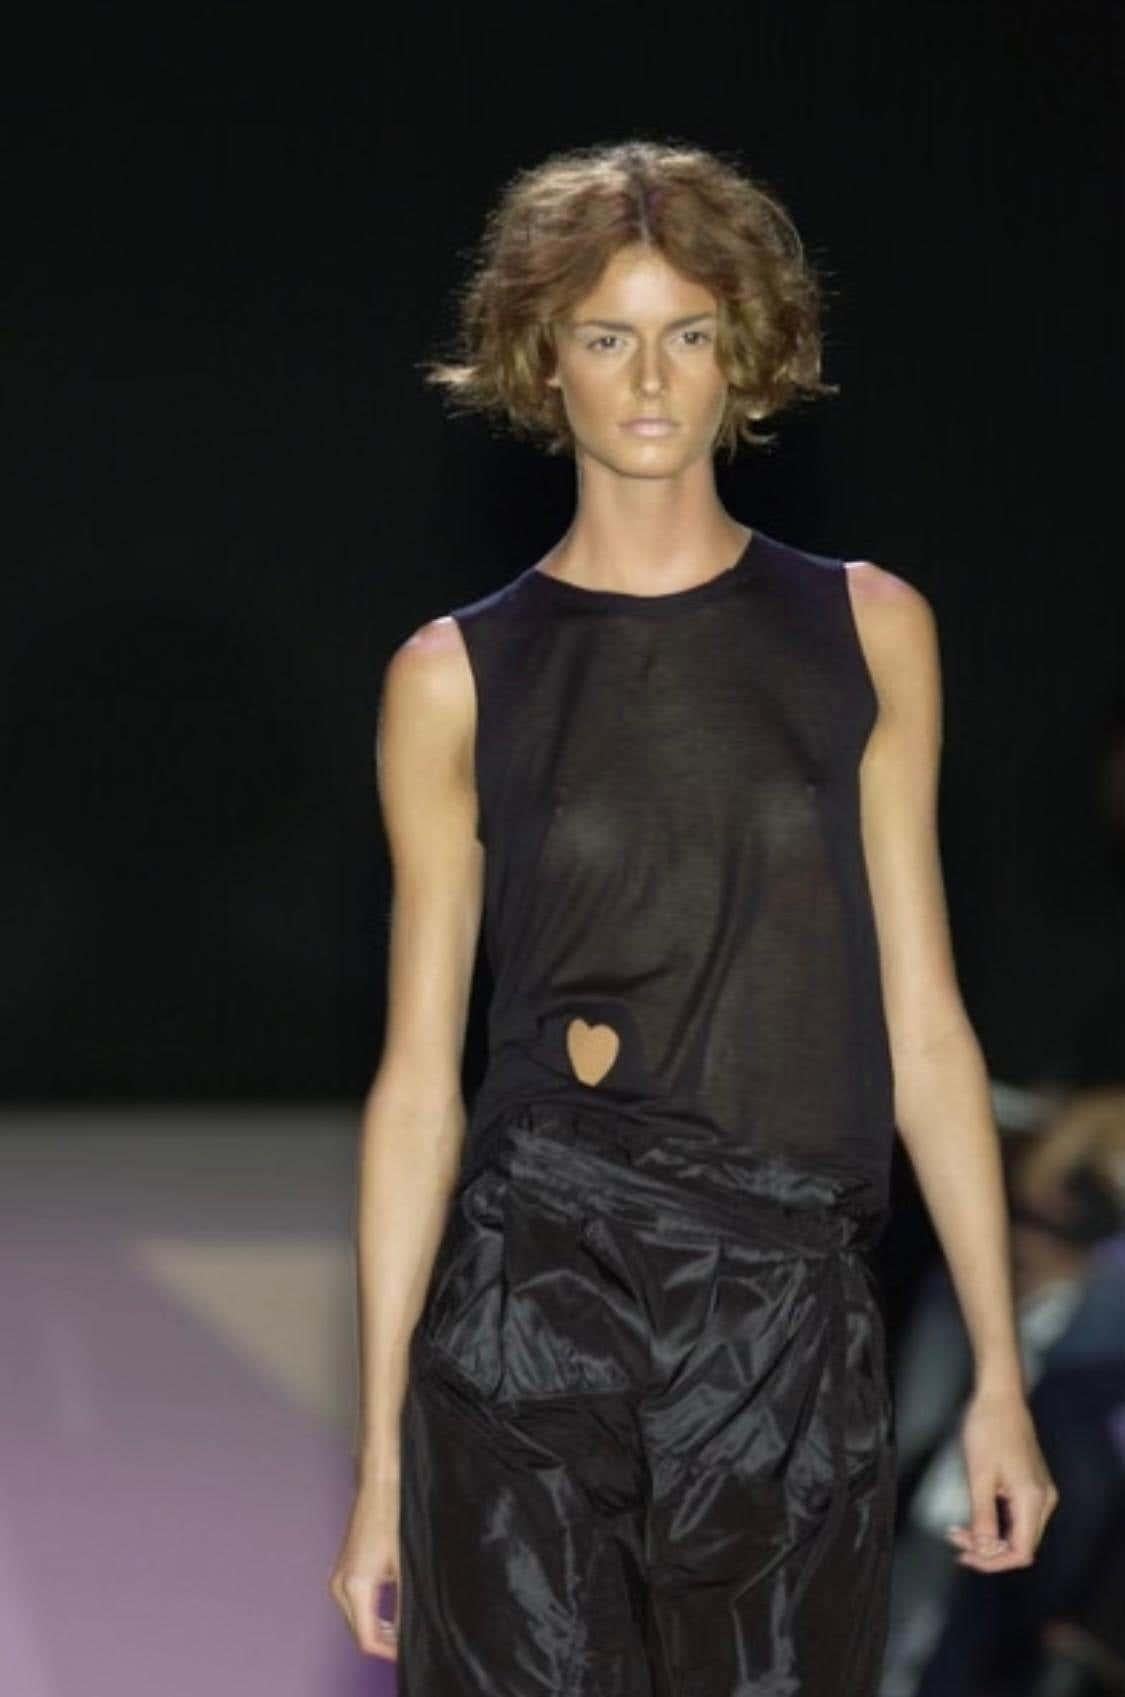 Presenting a black sleeveless Gucci shirt, designed by Tom Ford. From the Spring/Summer 2002 collection, this top debuted on look 33 modeled by Jacquetta Wheeler with the white version debuting as look 3 modeled by Abbey Shaine. This semi-sheer top